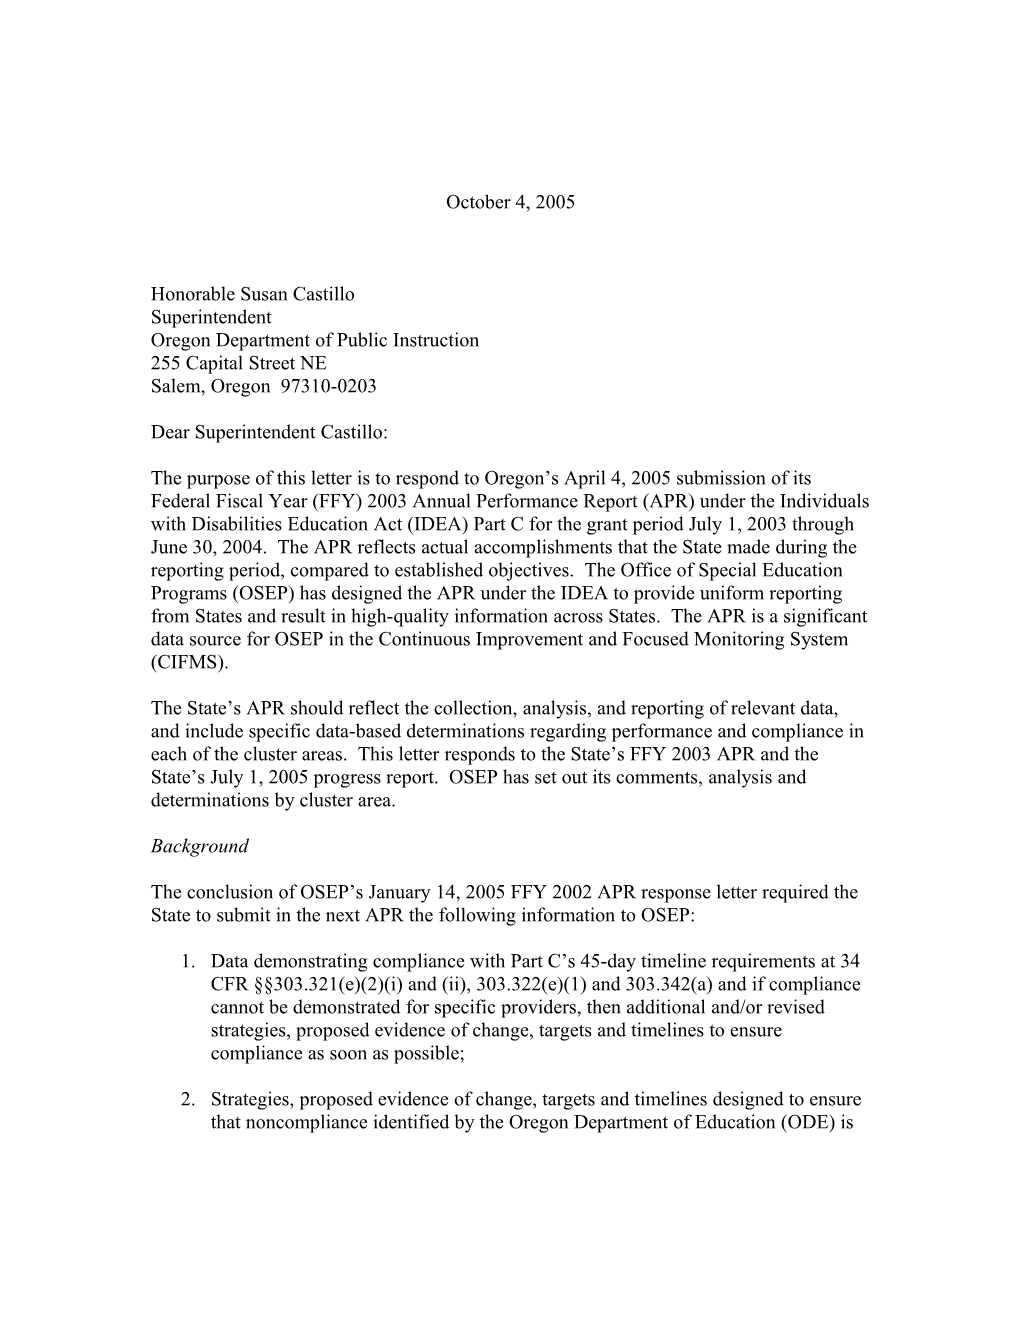 Oregon Part C APR Letter for Grant Year 2003-2004 (Msword)